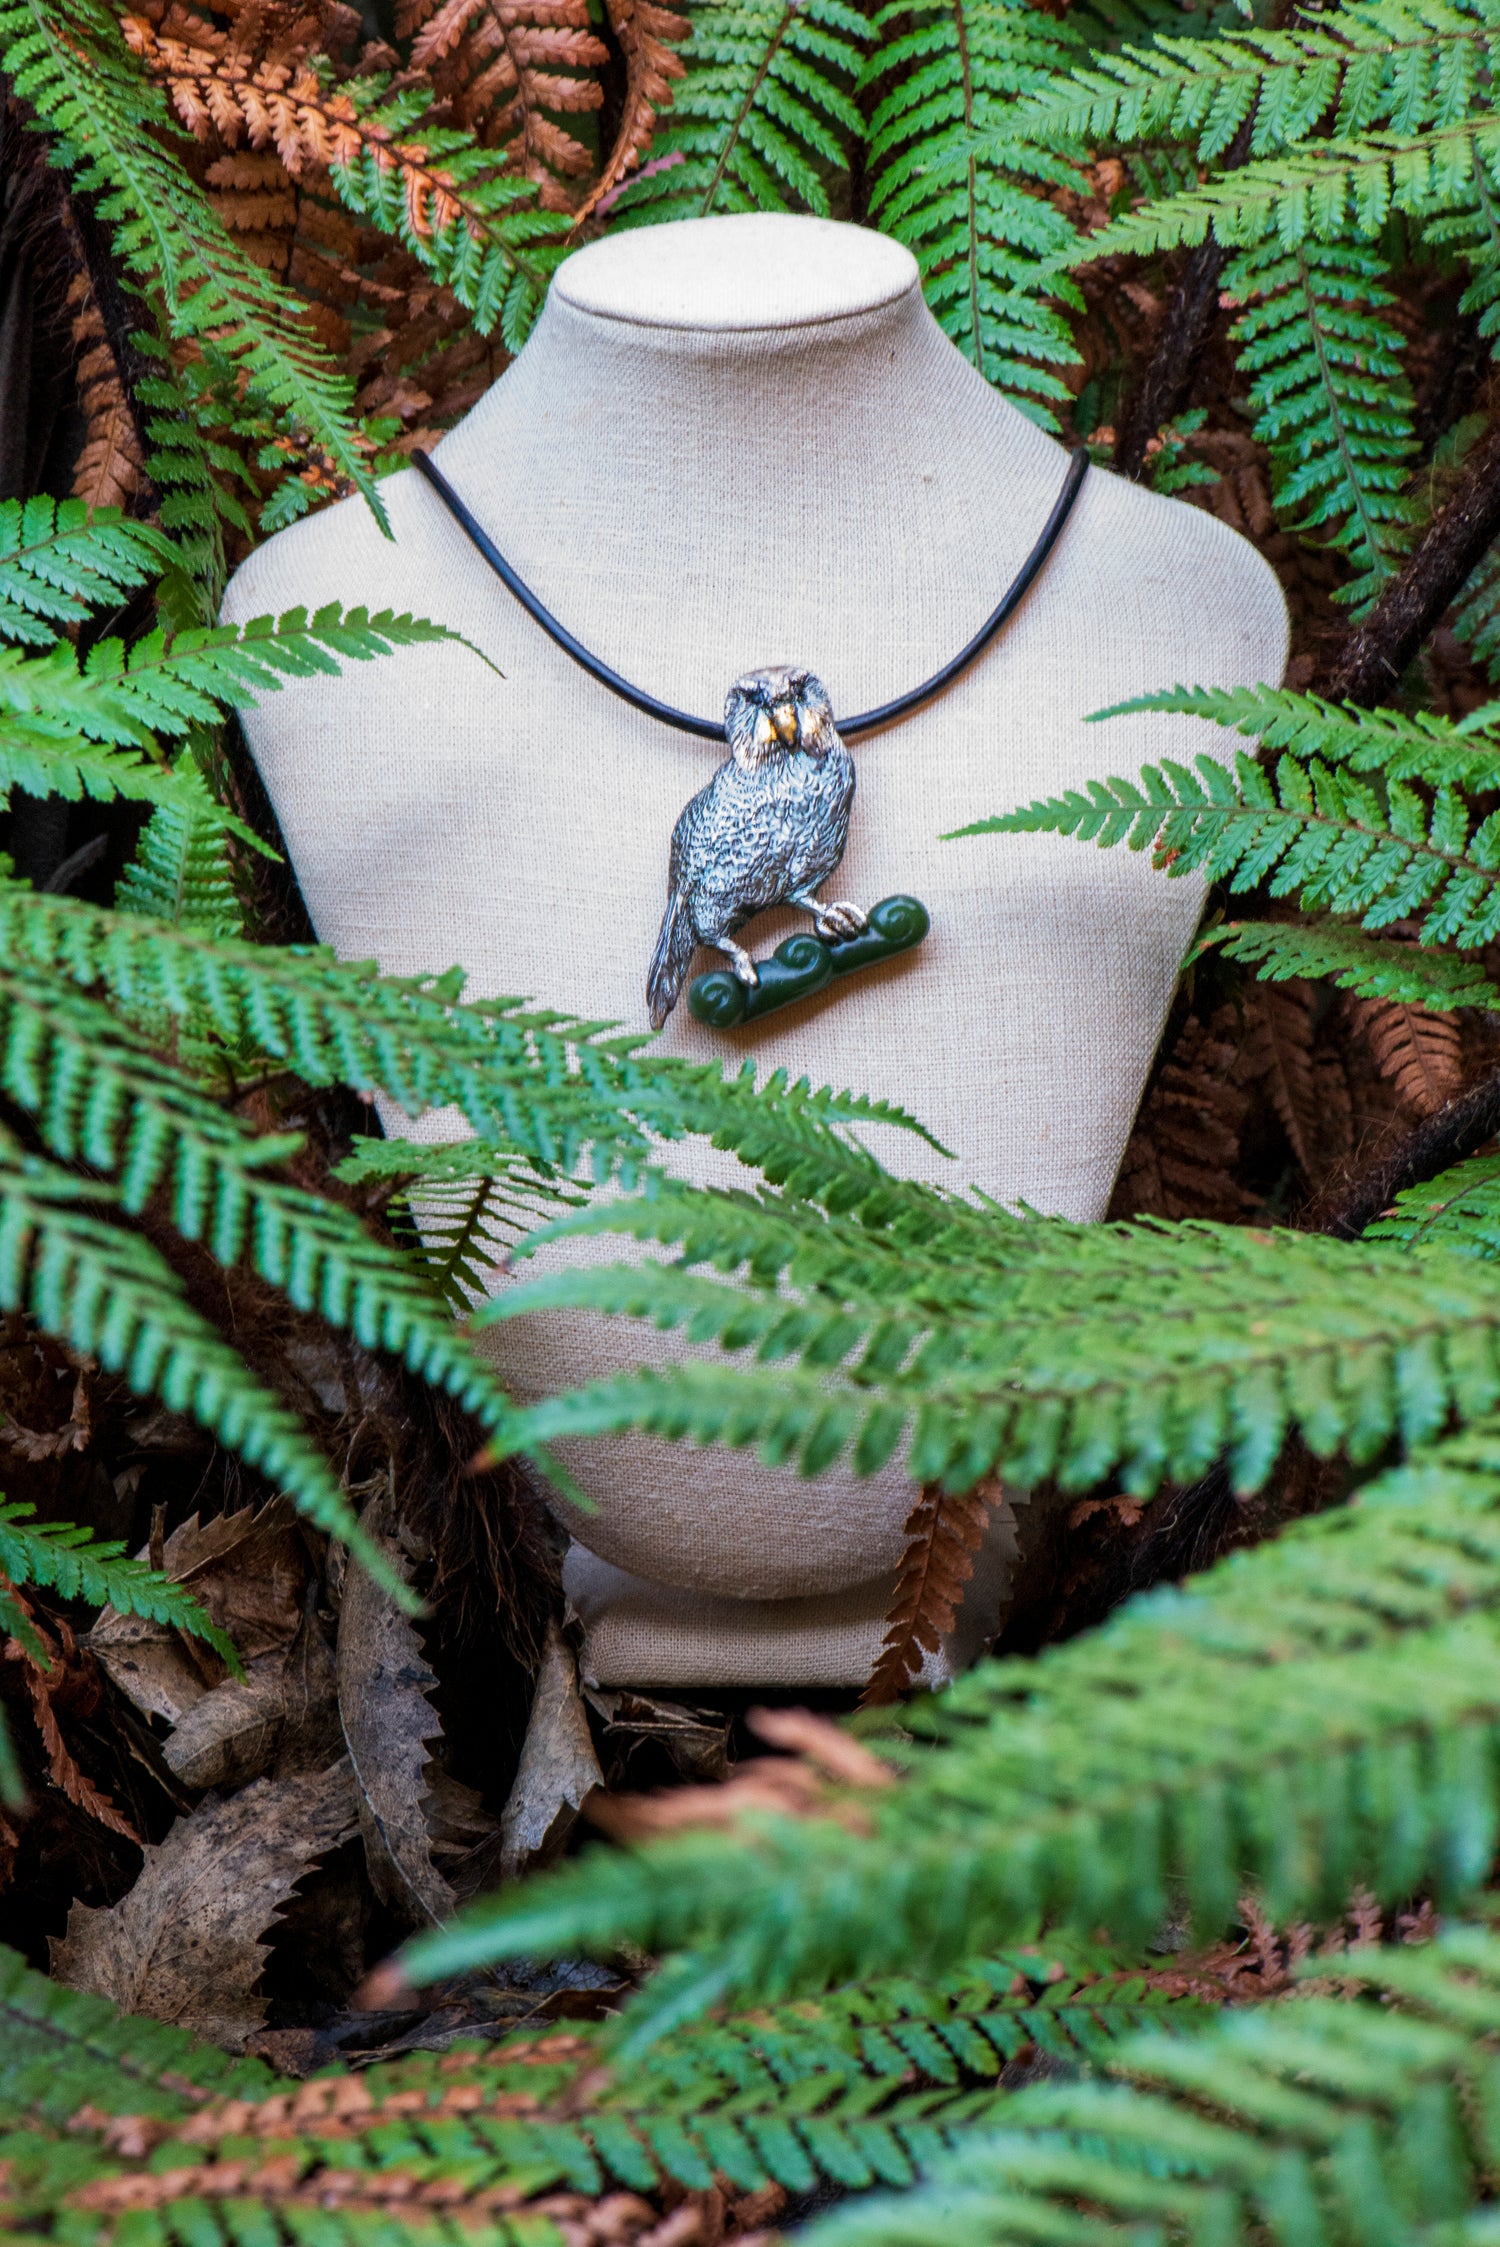 Kakapo Collection: A Tribute to Sirrocco's Enchanting Journey